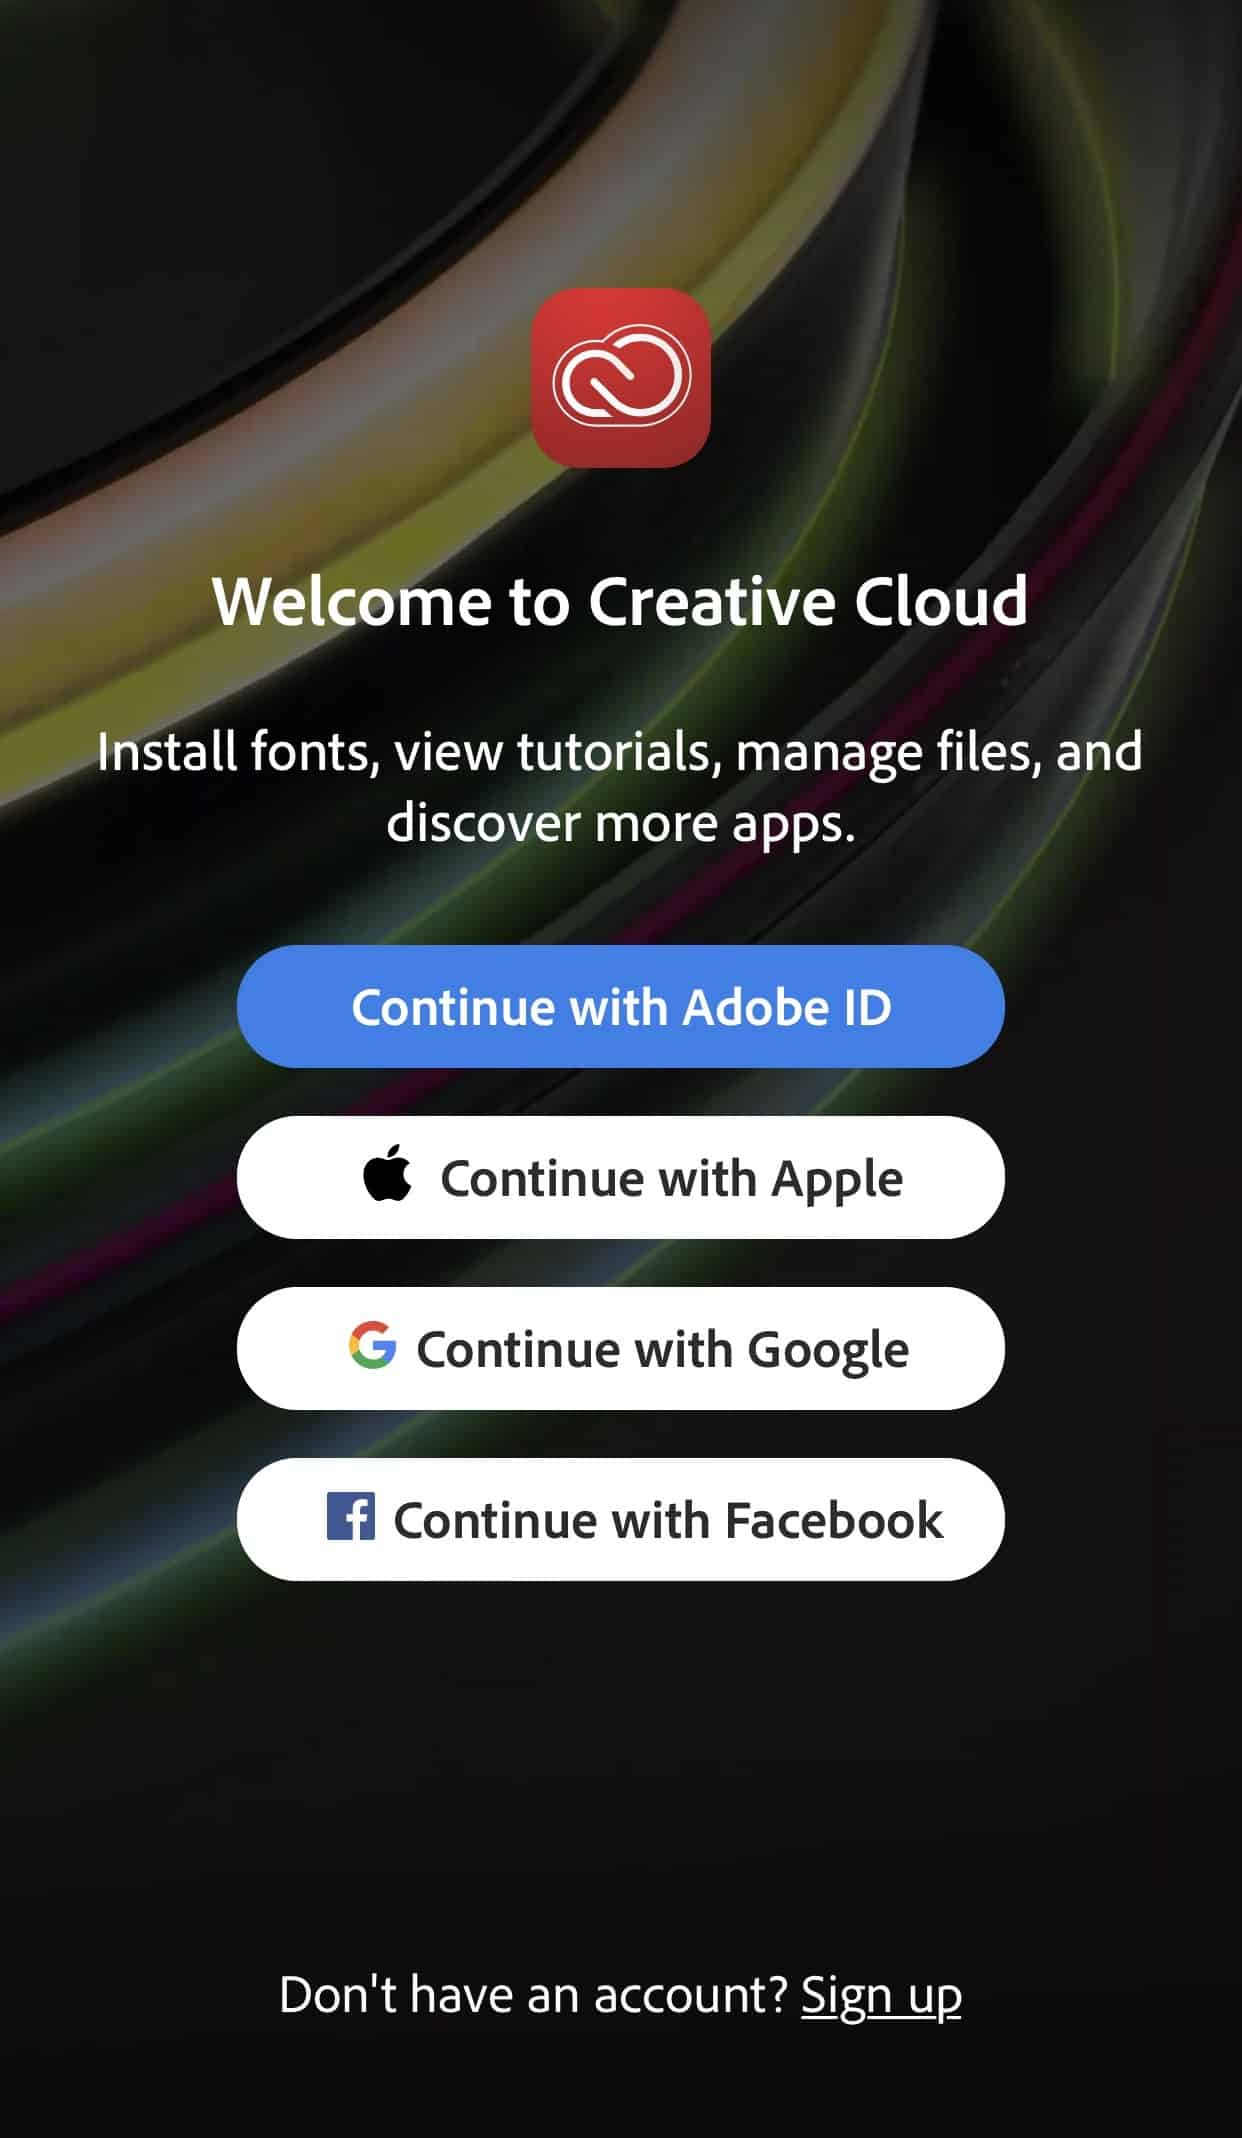 Installing or adding Custom Fonts on IOS 13 with the Adobe Creative Cloud App